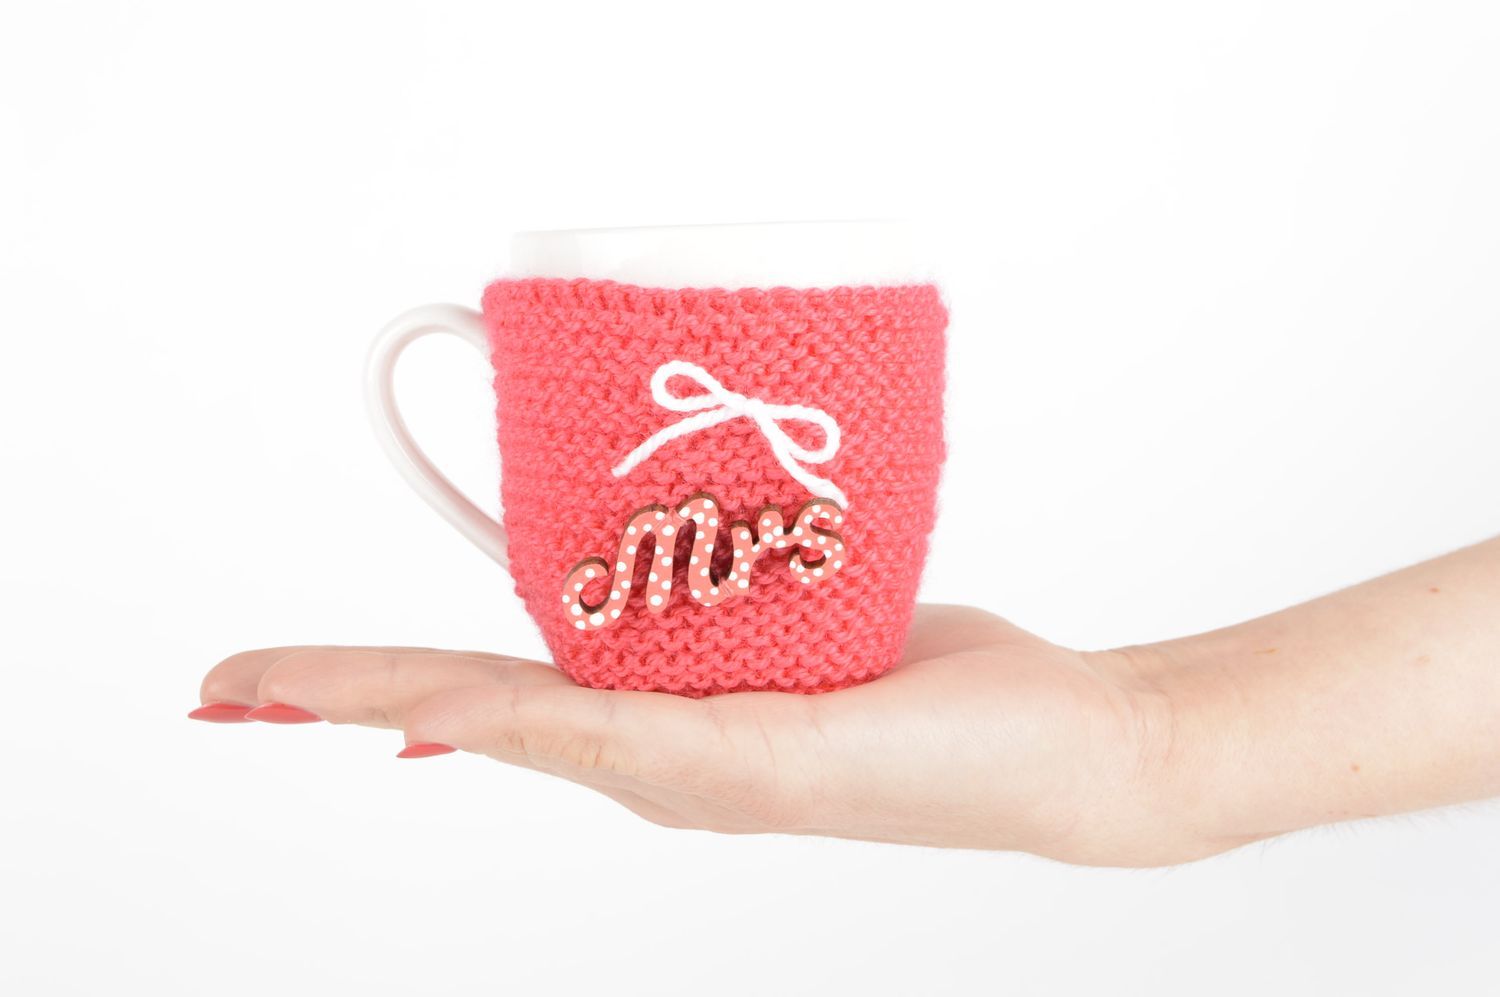 White porcelain 7 oz teacup with handle and knitted pink warmer cover with MRS pattern photo 5